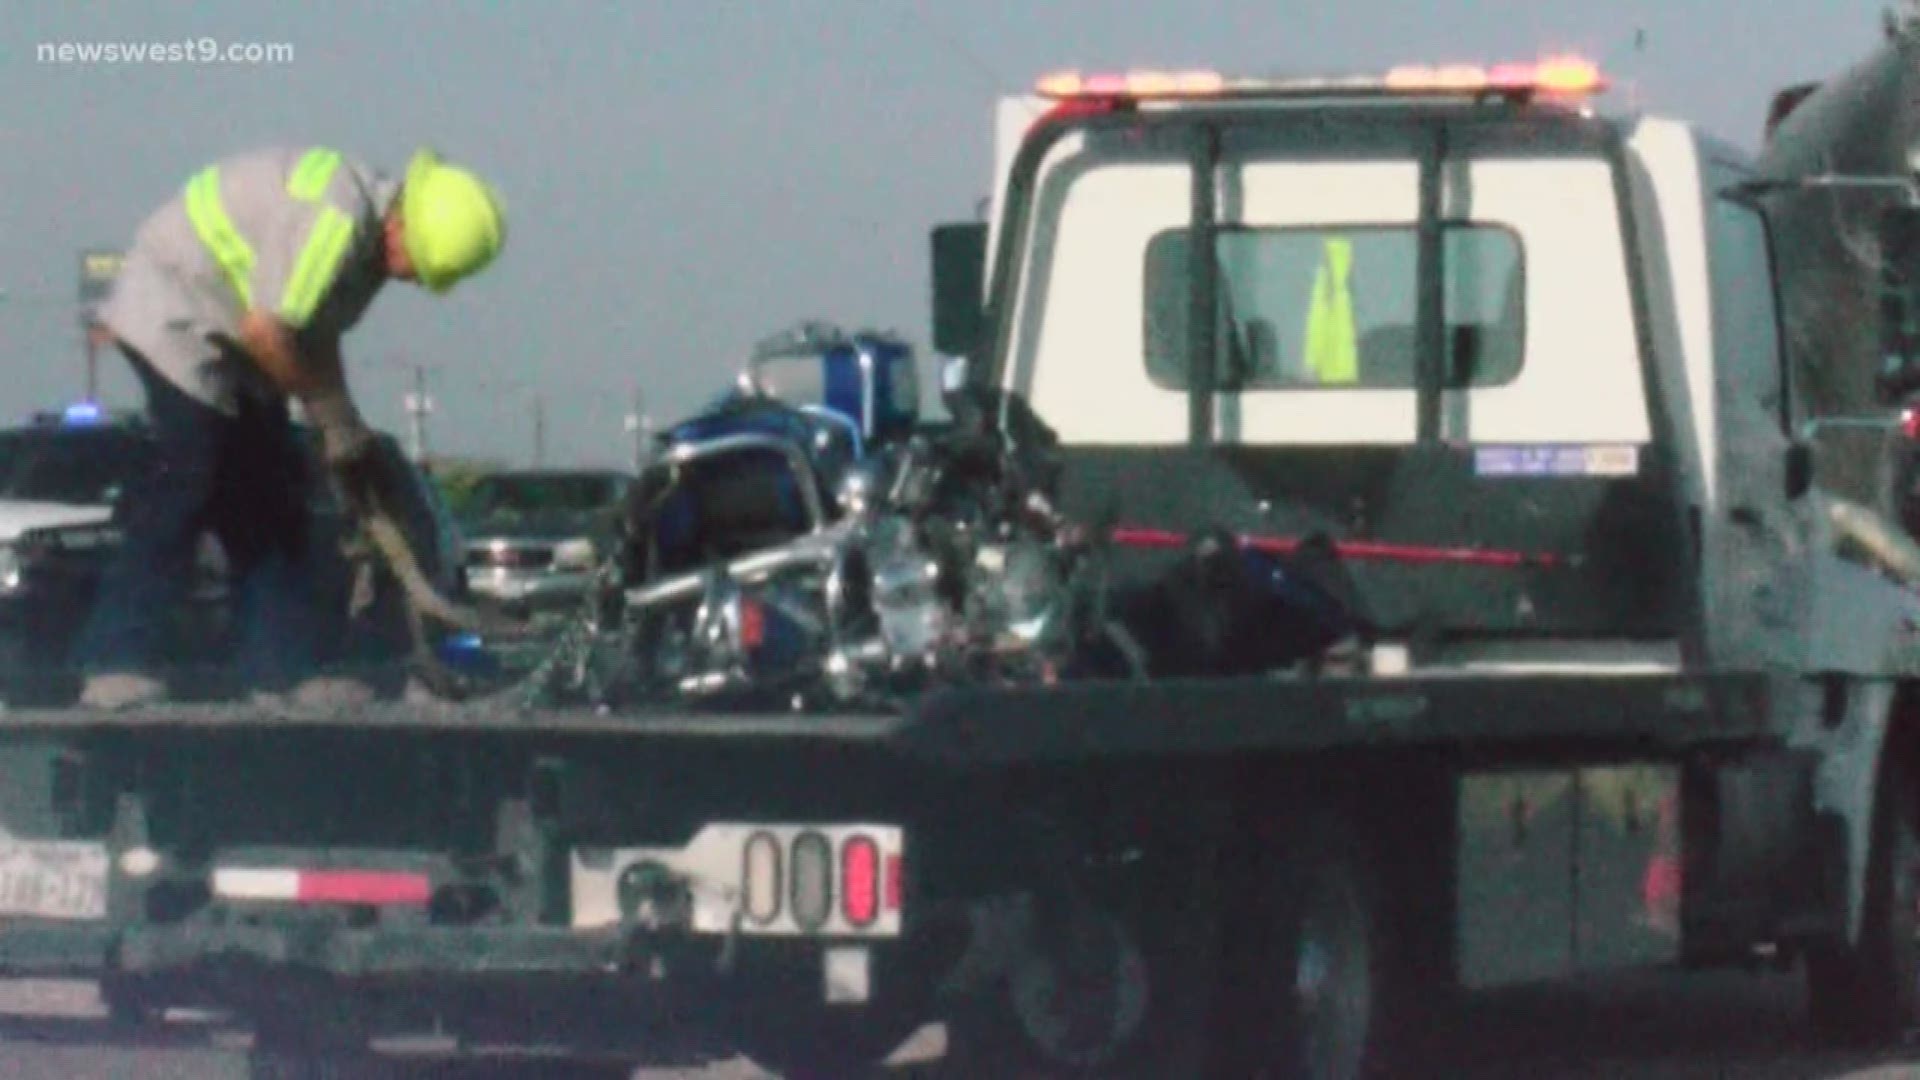 Authorities are working the scene of a major accident involving a motorcycle and an 18-wheeler